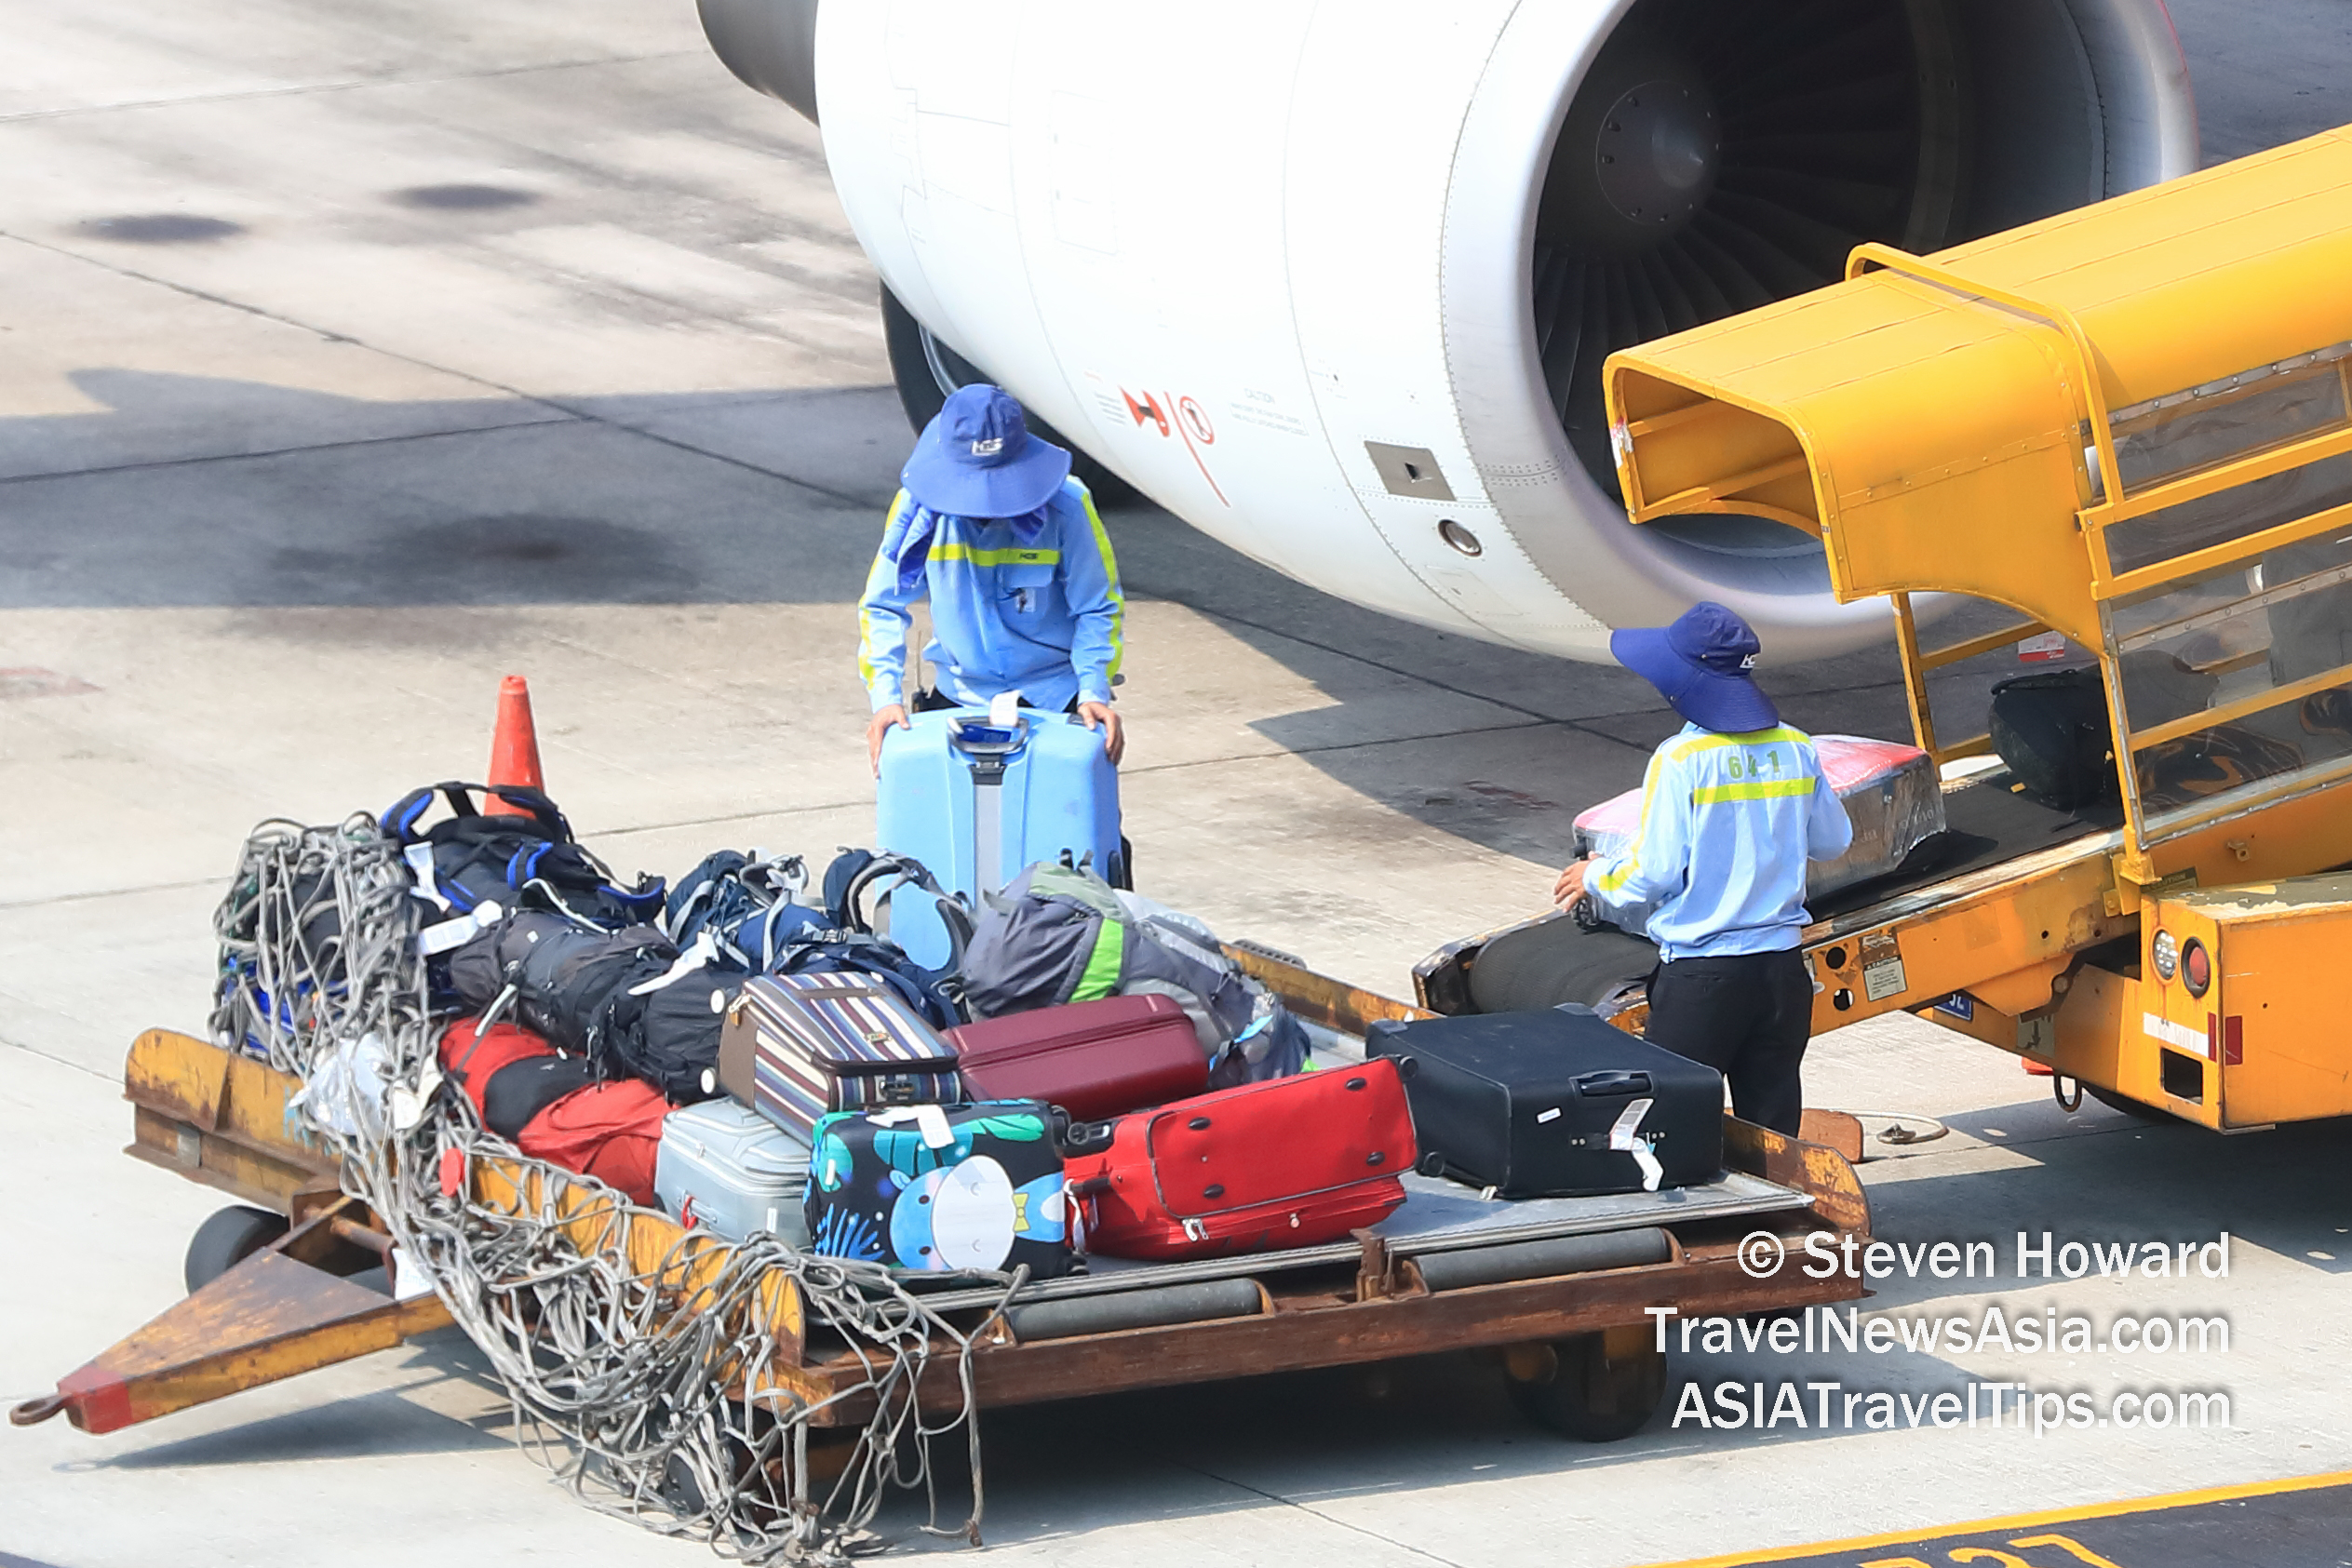 Vietnam Airlines is to change its baggage allowance policy on all domestic and international flights, replacing the current weight system with a piece concept. From 1 August 2019, the free baggage allowance will be determined by the number of pieces of luggage rather than the total amount of weight that a passenger can travel with. Picture by Steven Howard of TravelNewsAsia.com Click to enlarge.